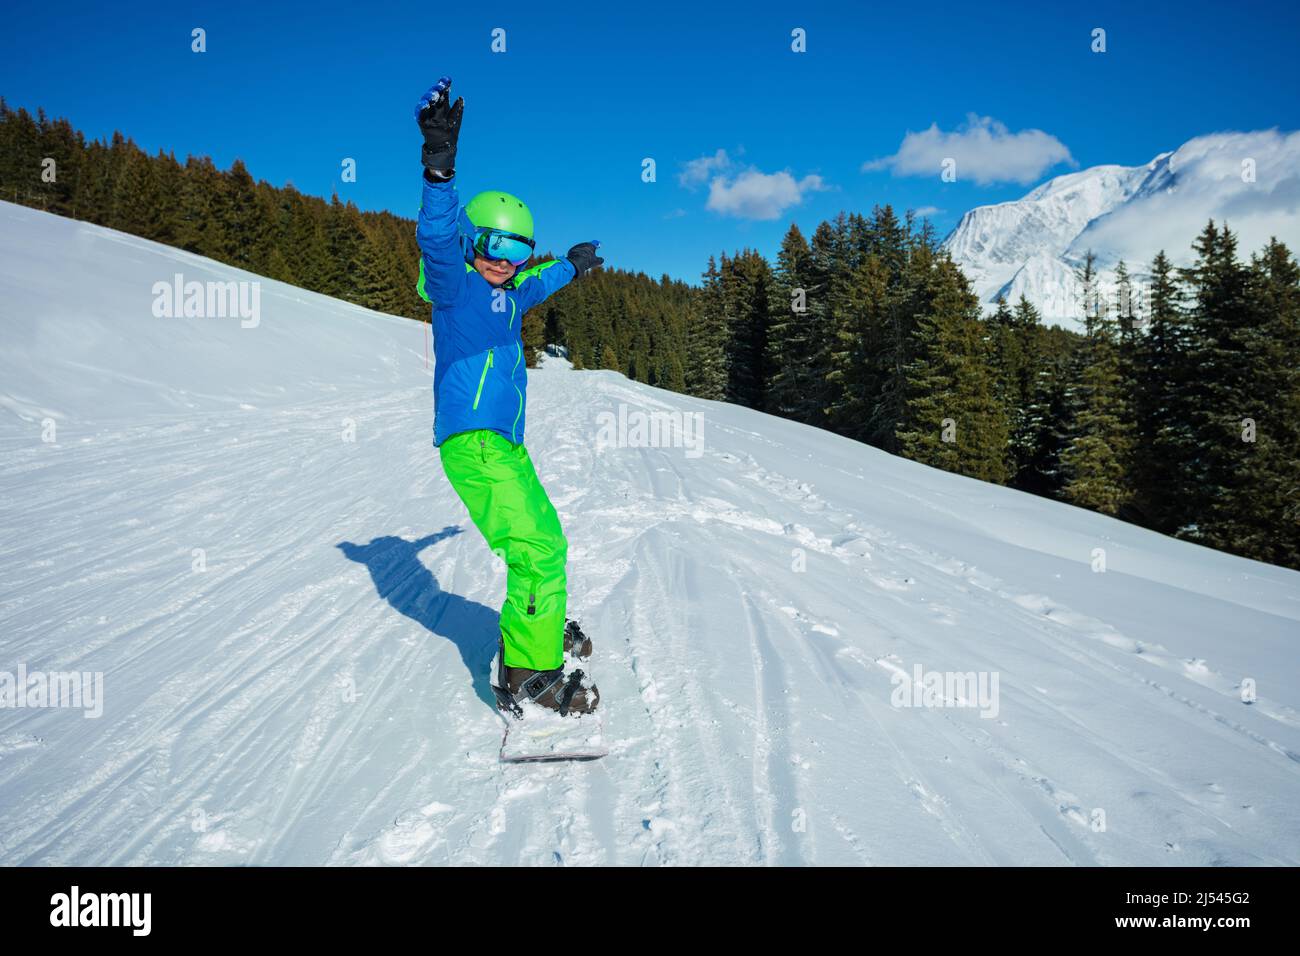 Boy slide fast on snowboard from the mountain, front view Stock Photo